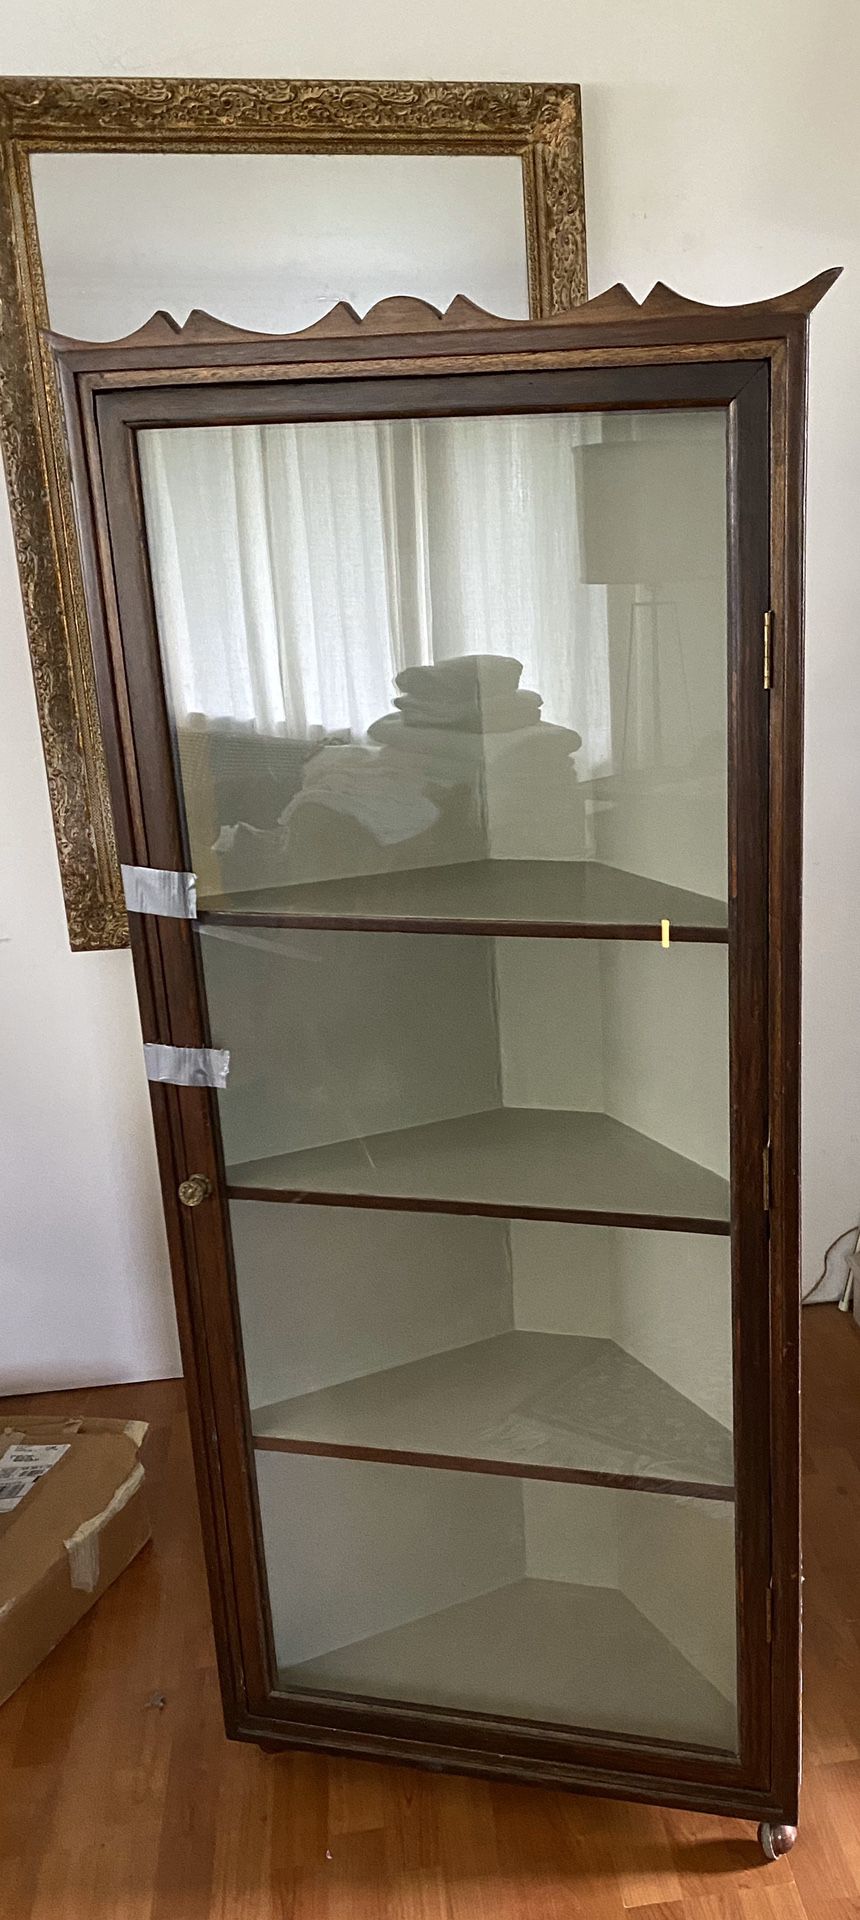 Very nice Antique Corner Display Cabinet Shelf with Glass door on Wheels Kitchen Dining Office Display collections